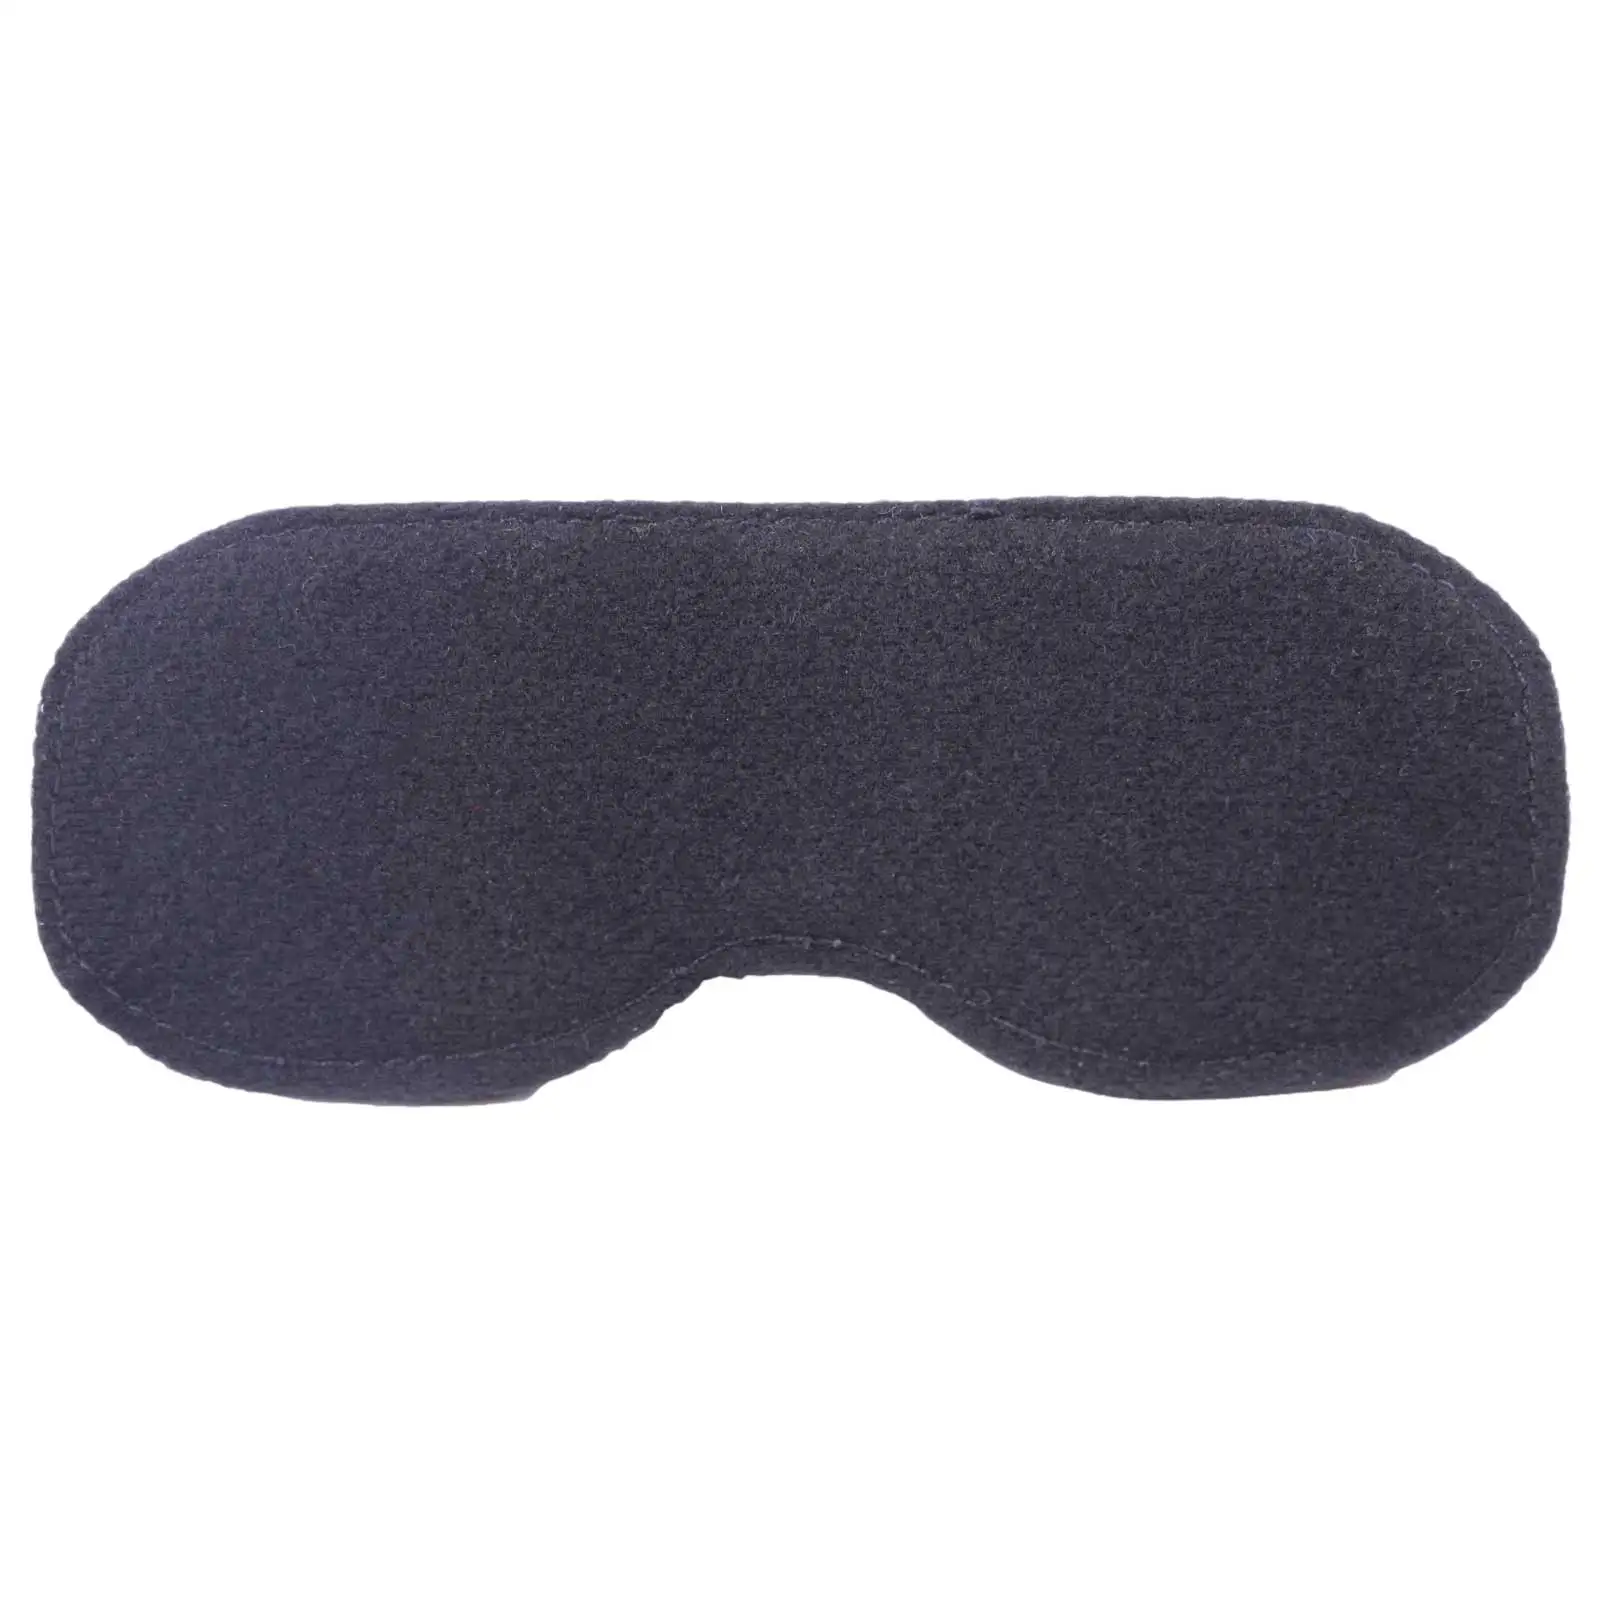 Multifunctional Dustproof And Shading Storage Mat V2 Flying Glasses Cover Dust-proof Storage Mat For DJI FPV Done